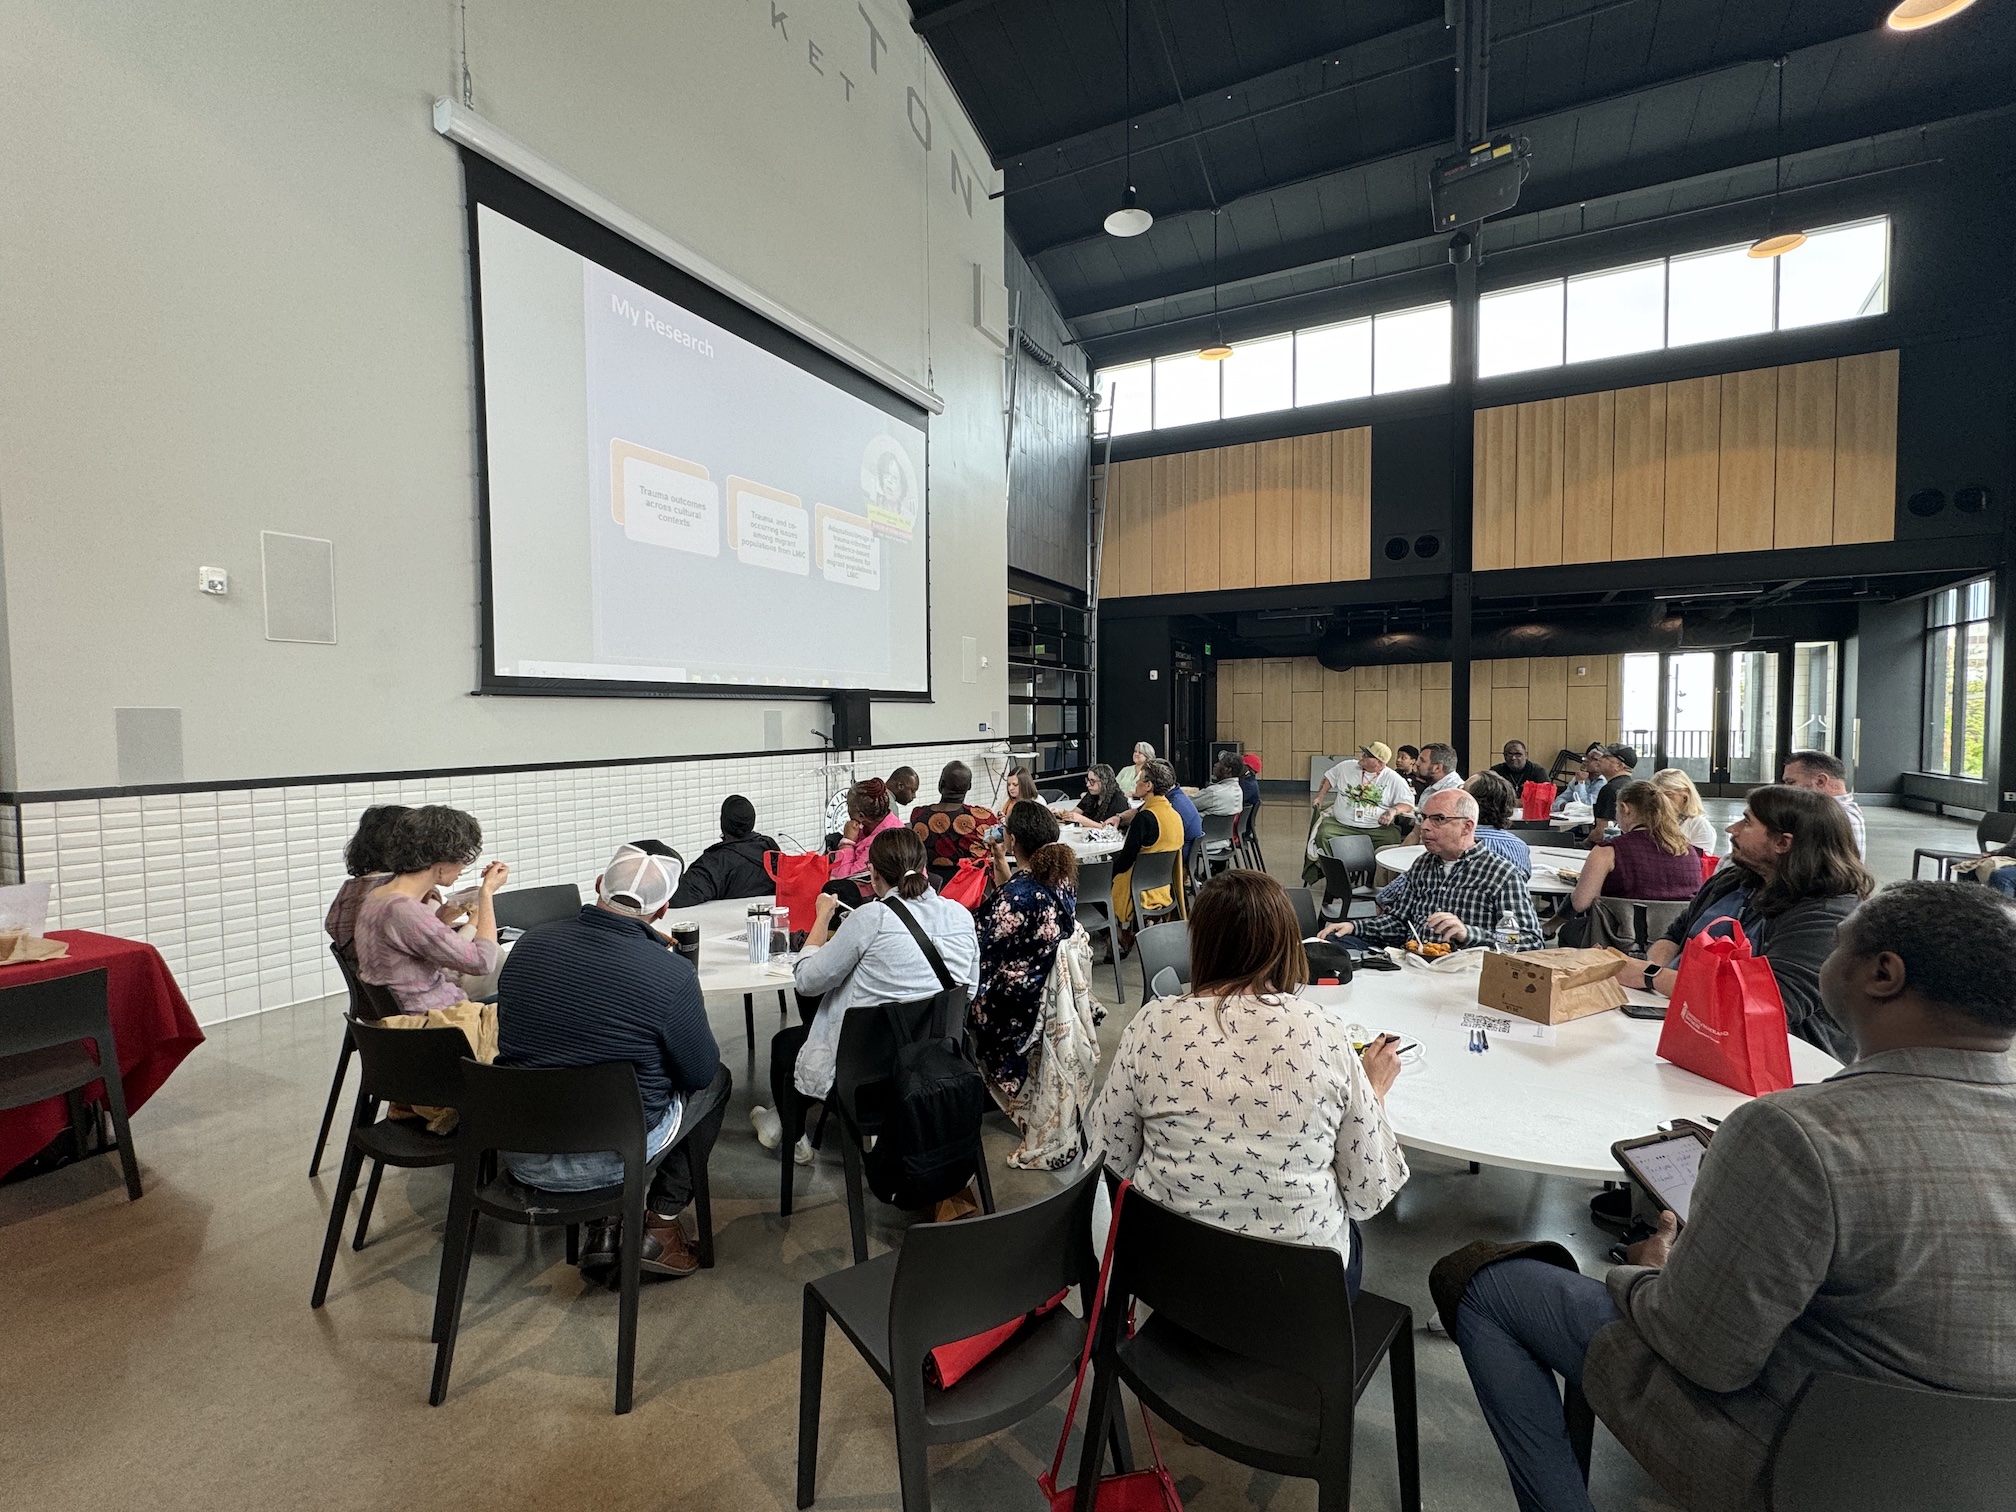 Attendees of the Lexington Market Day event enjoy a delightful meal while engaging with the insightful presentation. A perfect blend of community, cuisine, and conversation!